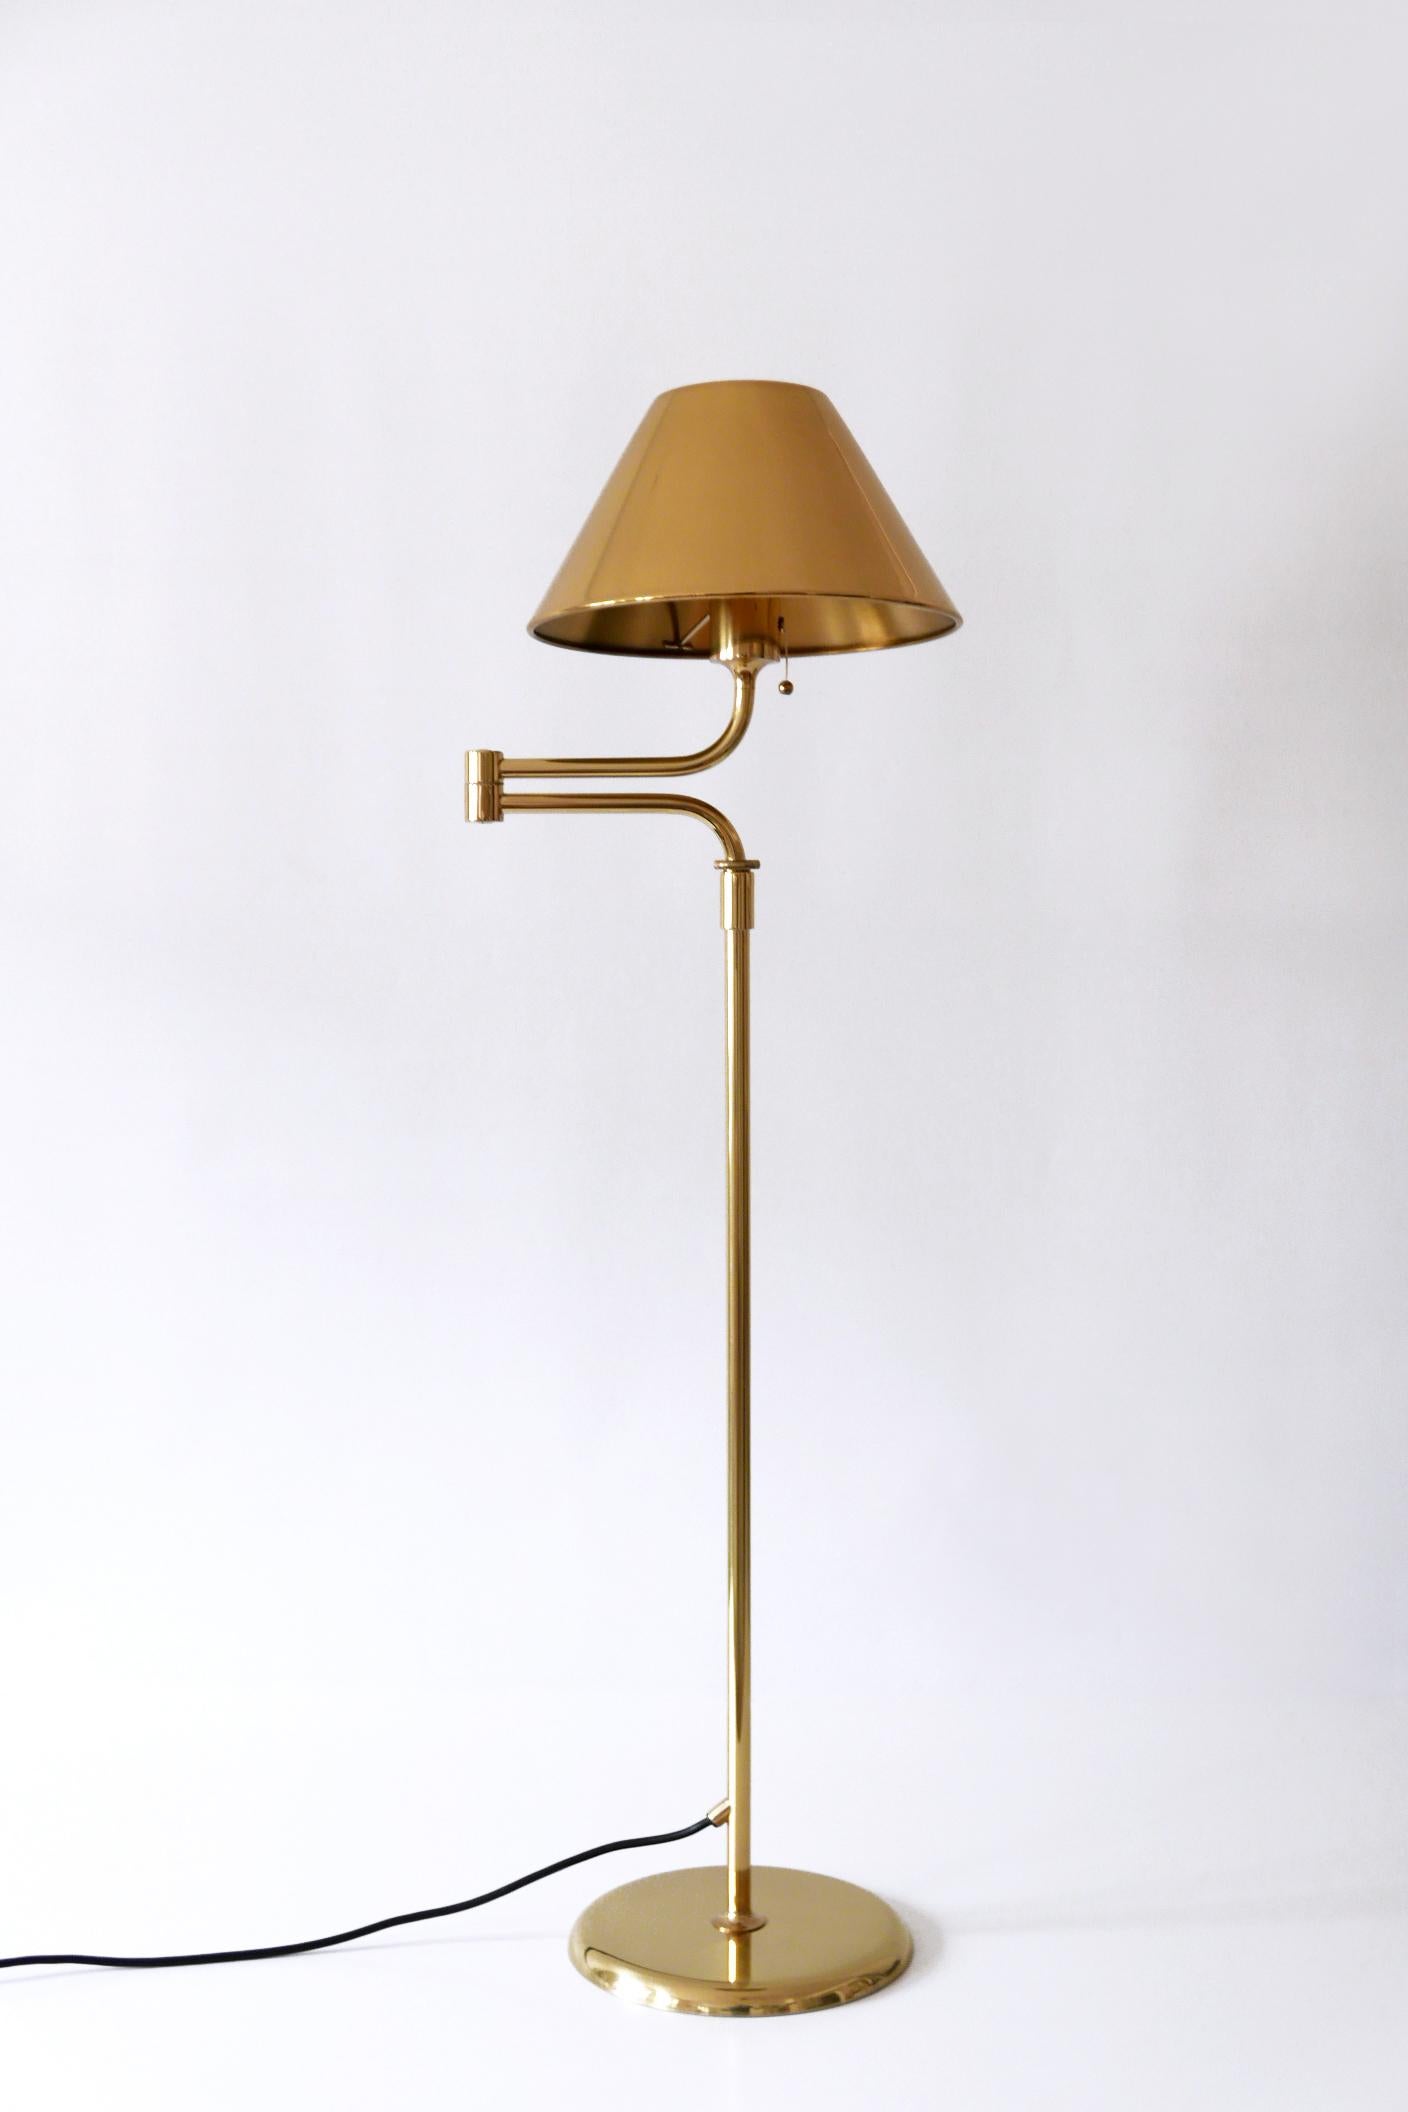 Articulated Brass Floor Lamp or Reading Light by Florian Schulz 1980s Germany 3